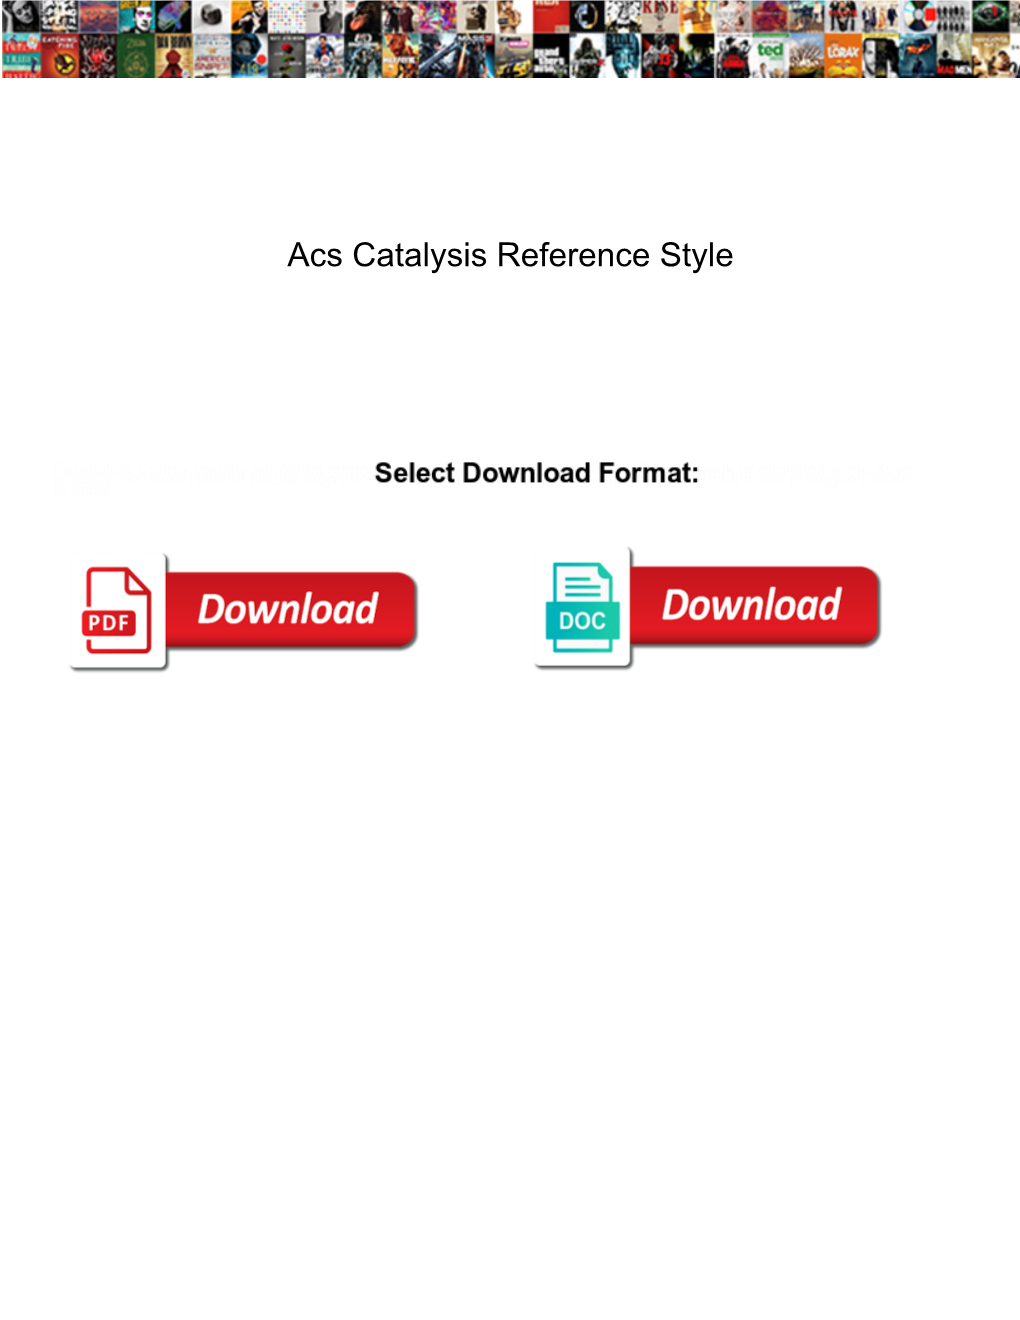 Acs Catalysis Reference Style